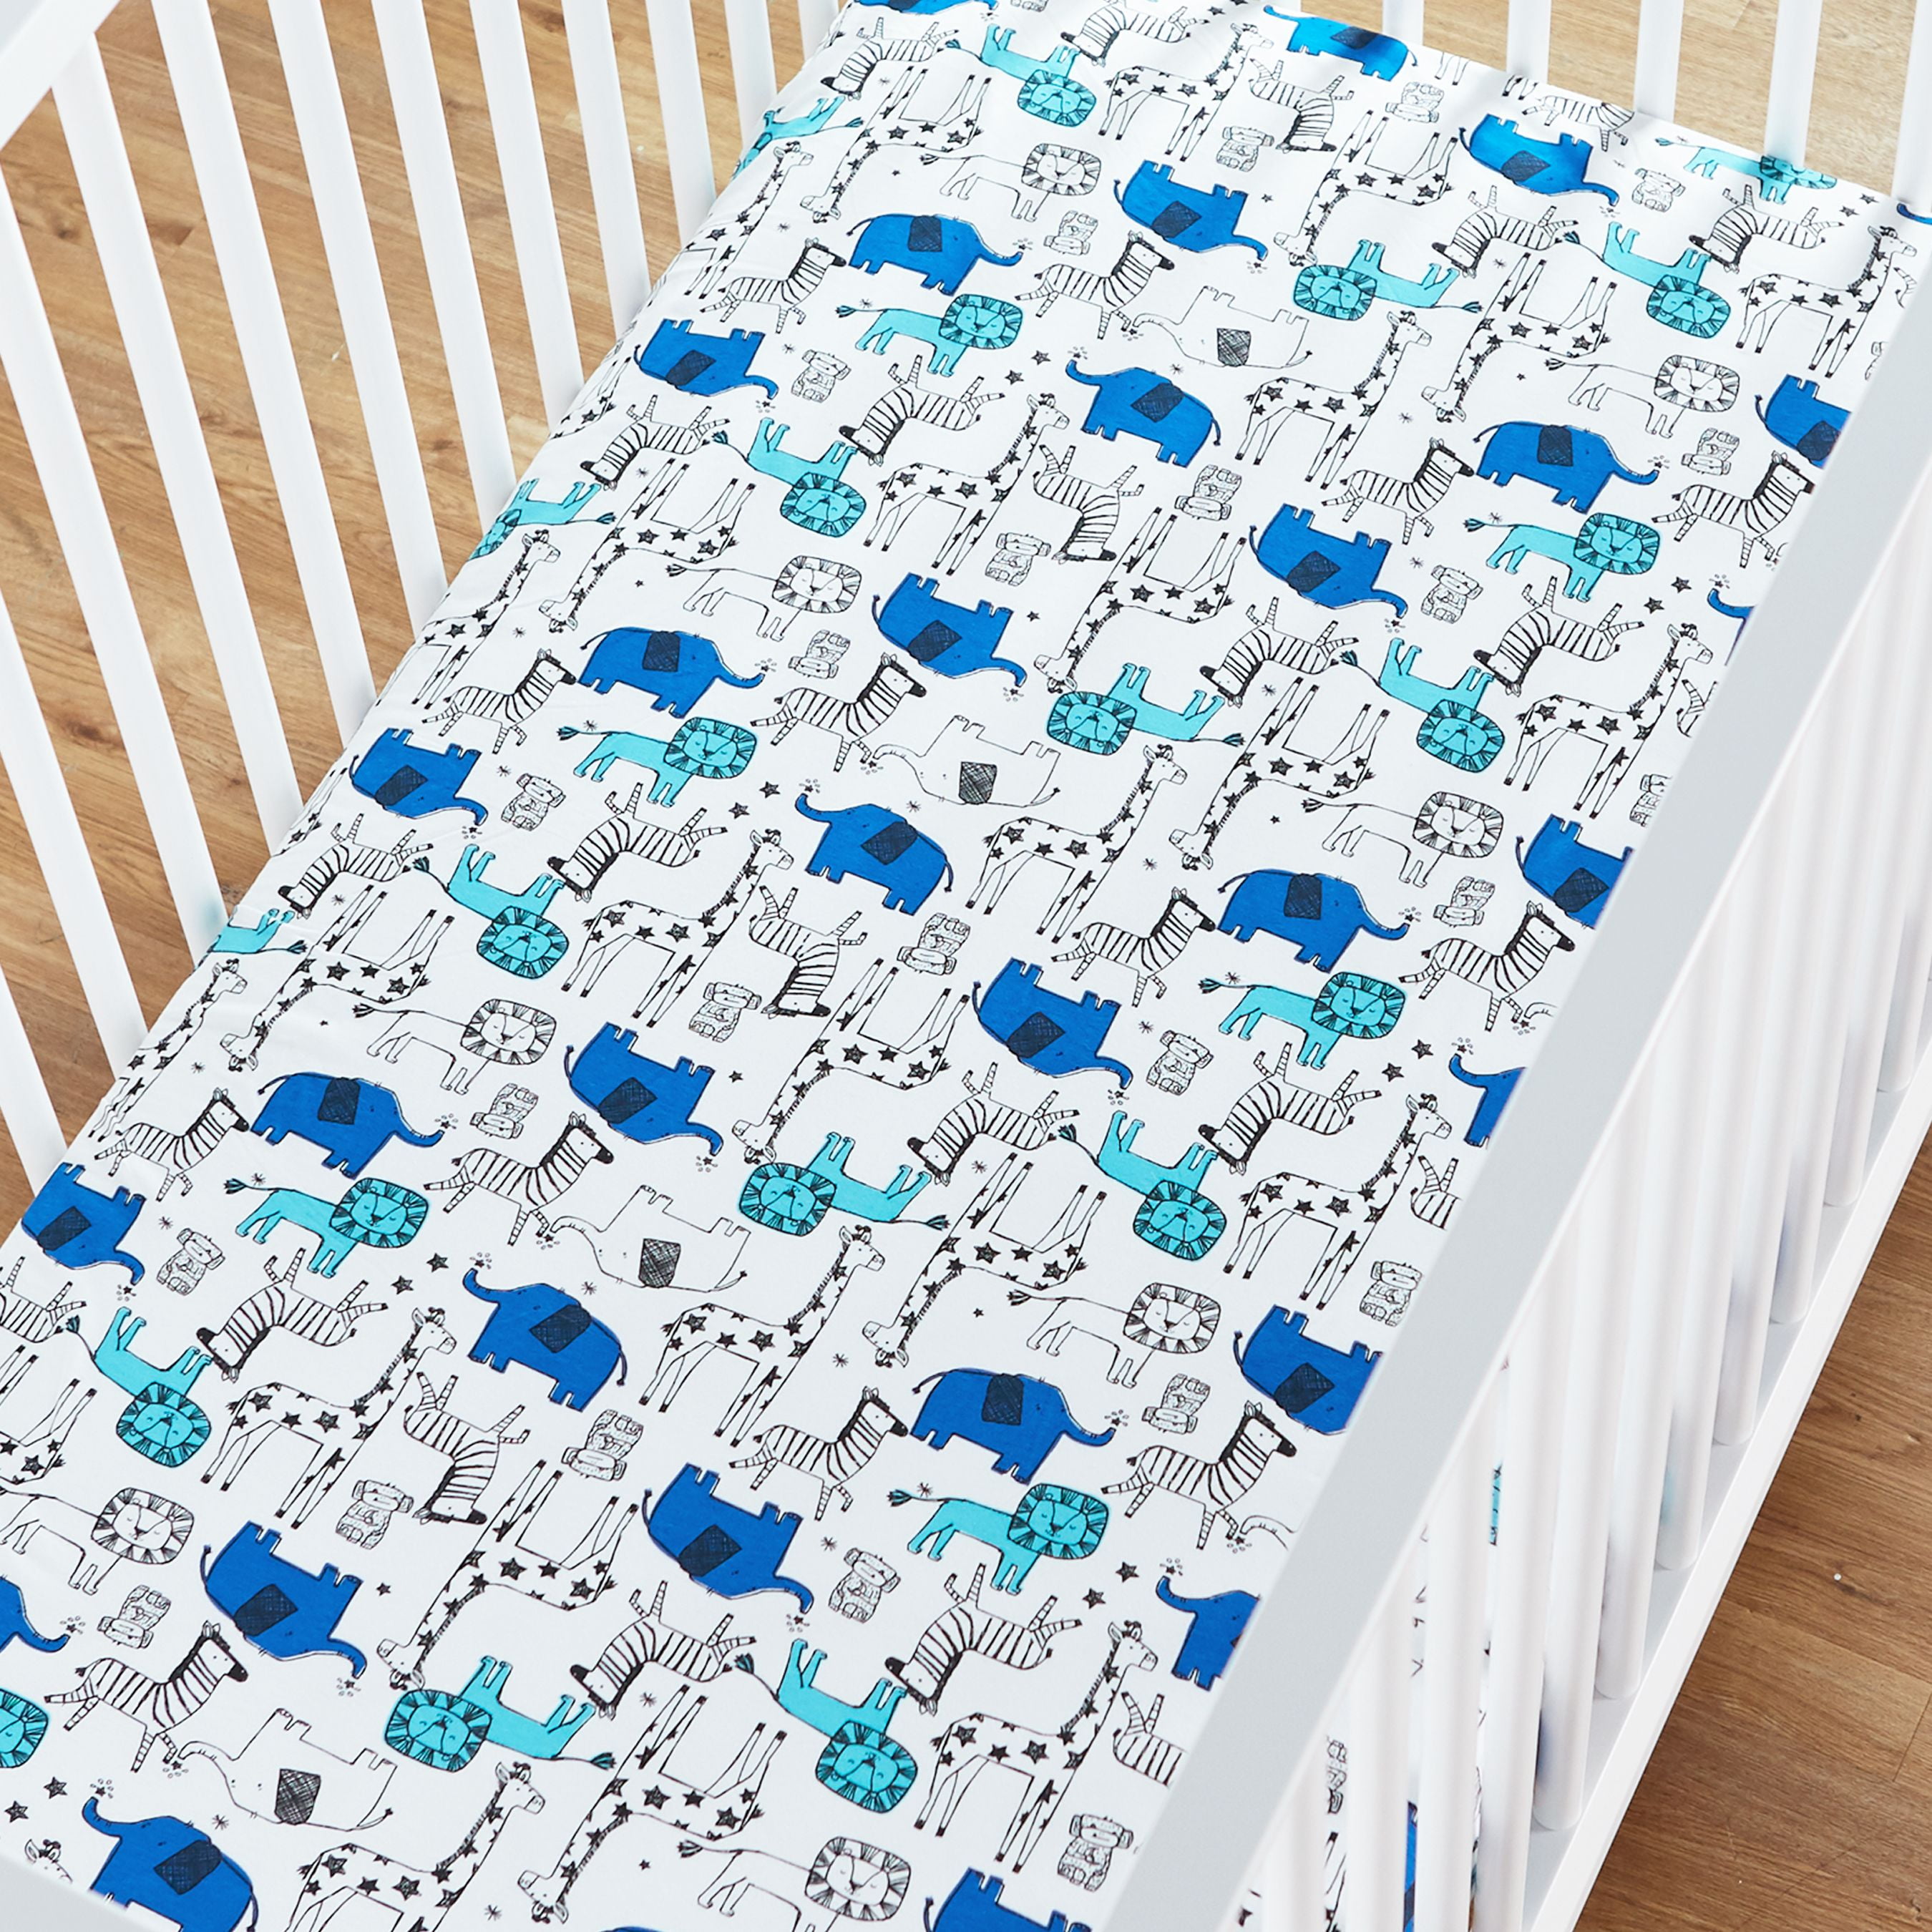  SheetWorld Crib Bib Sheet Saver - 13x27 Inches, Soft Cotton  Material, 4 Secure Corner Ties - Essential Baby Bedding for Easy Clean-Up  and Comfort - Proudly Made in the USA 